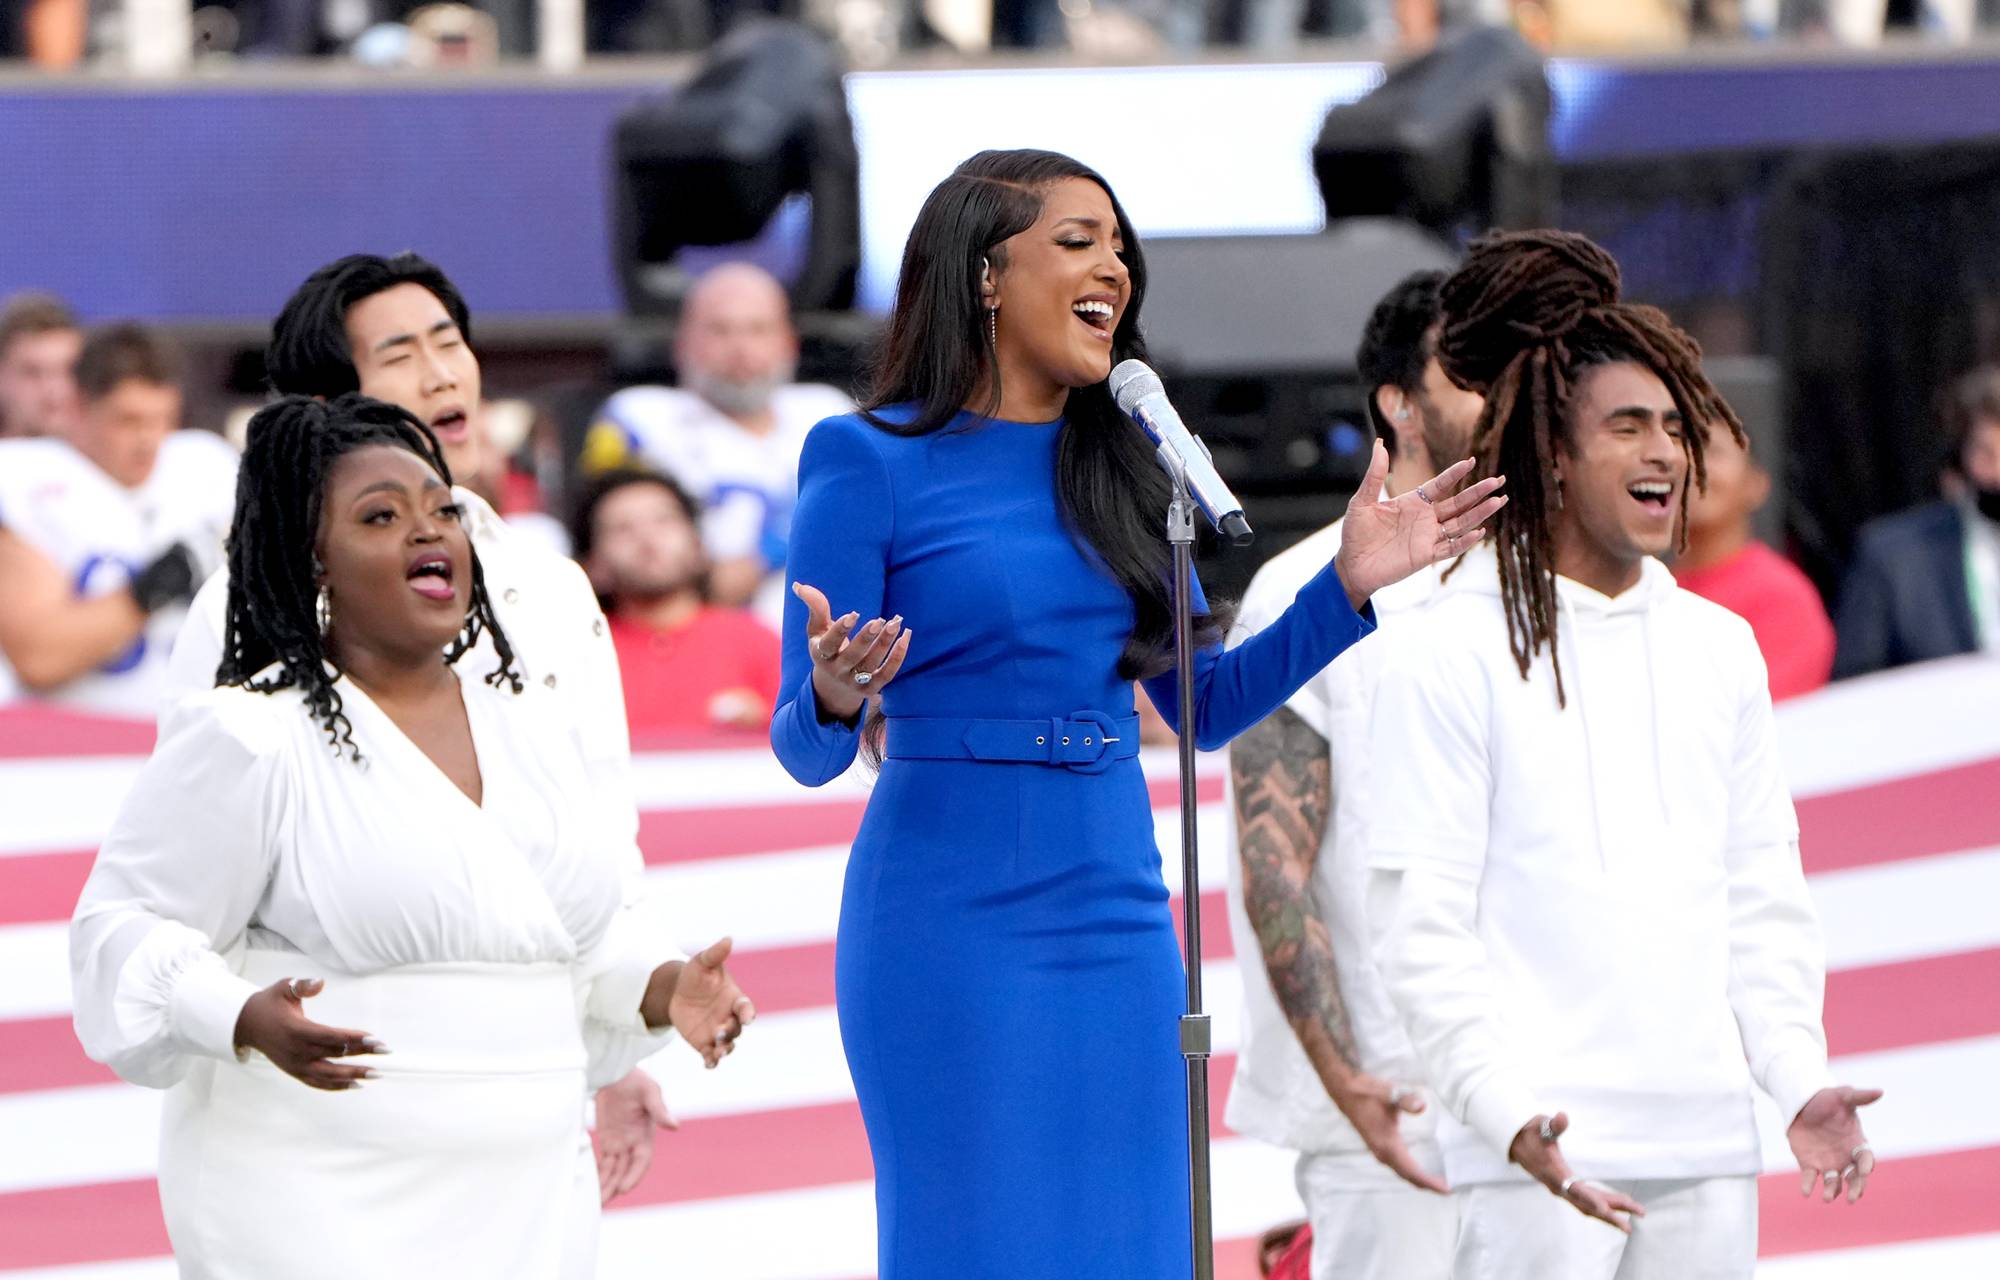 Super Bowl 2022: Who is singing the national anthem? Mickey Guyton